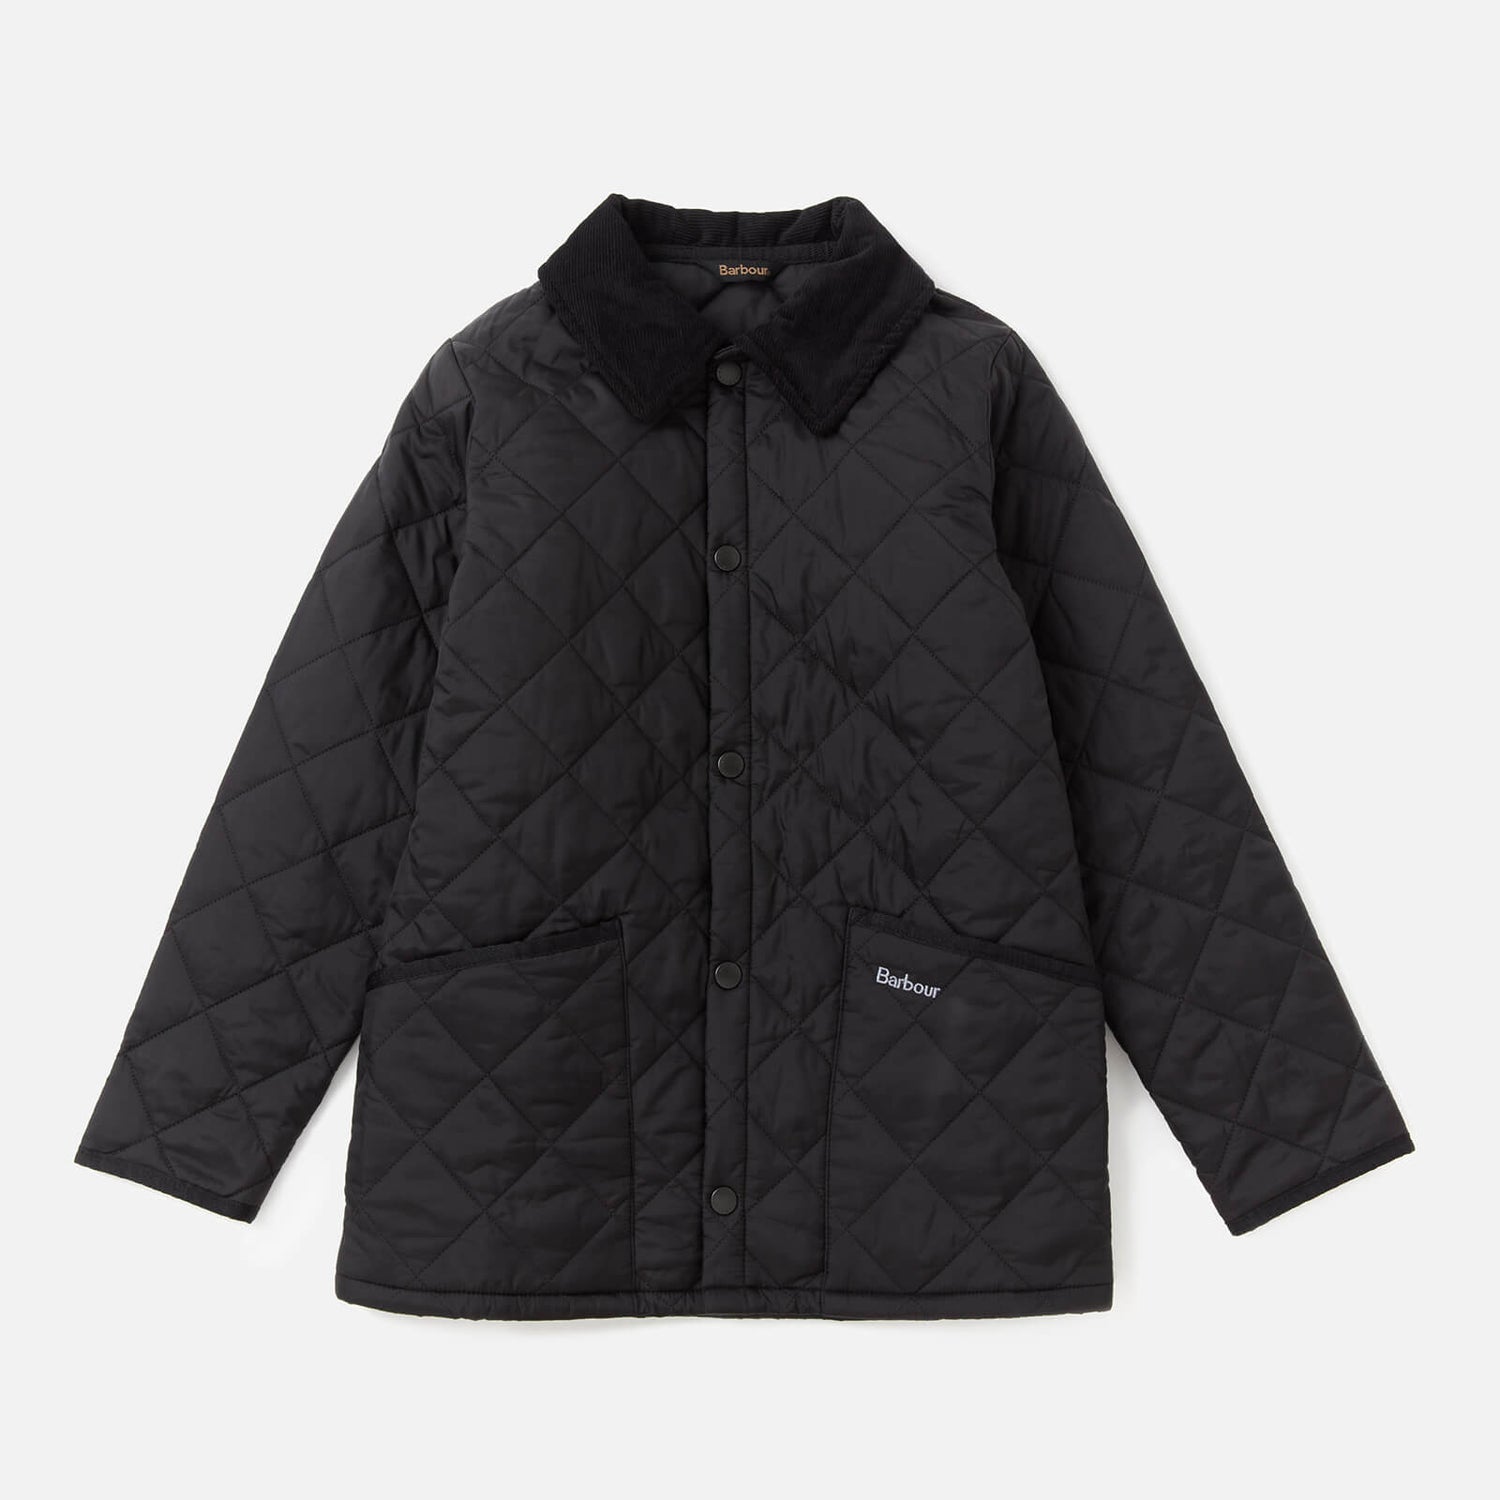 Barbour Boys' Liddesdale Quilted Jacket - Black - M (8-9 Years)